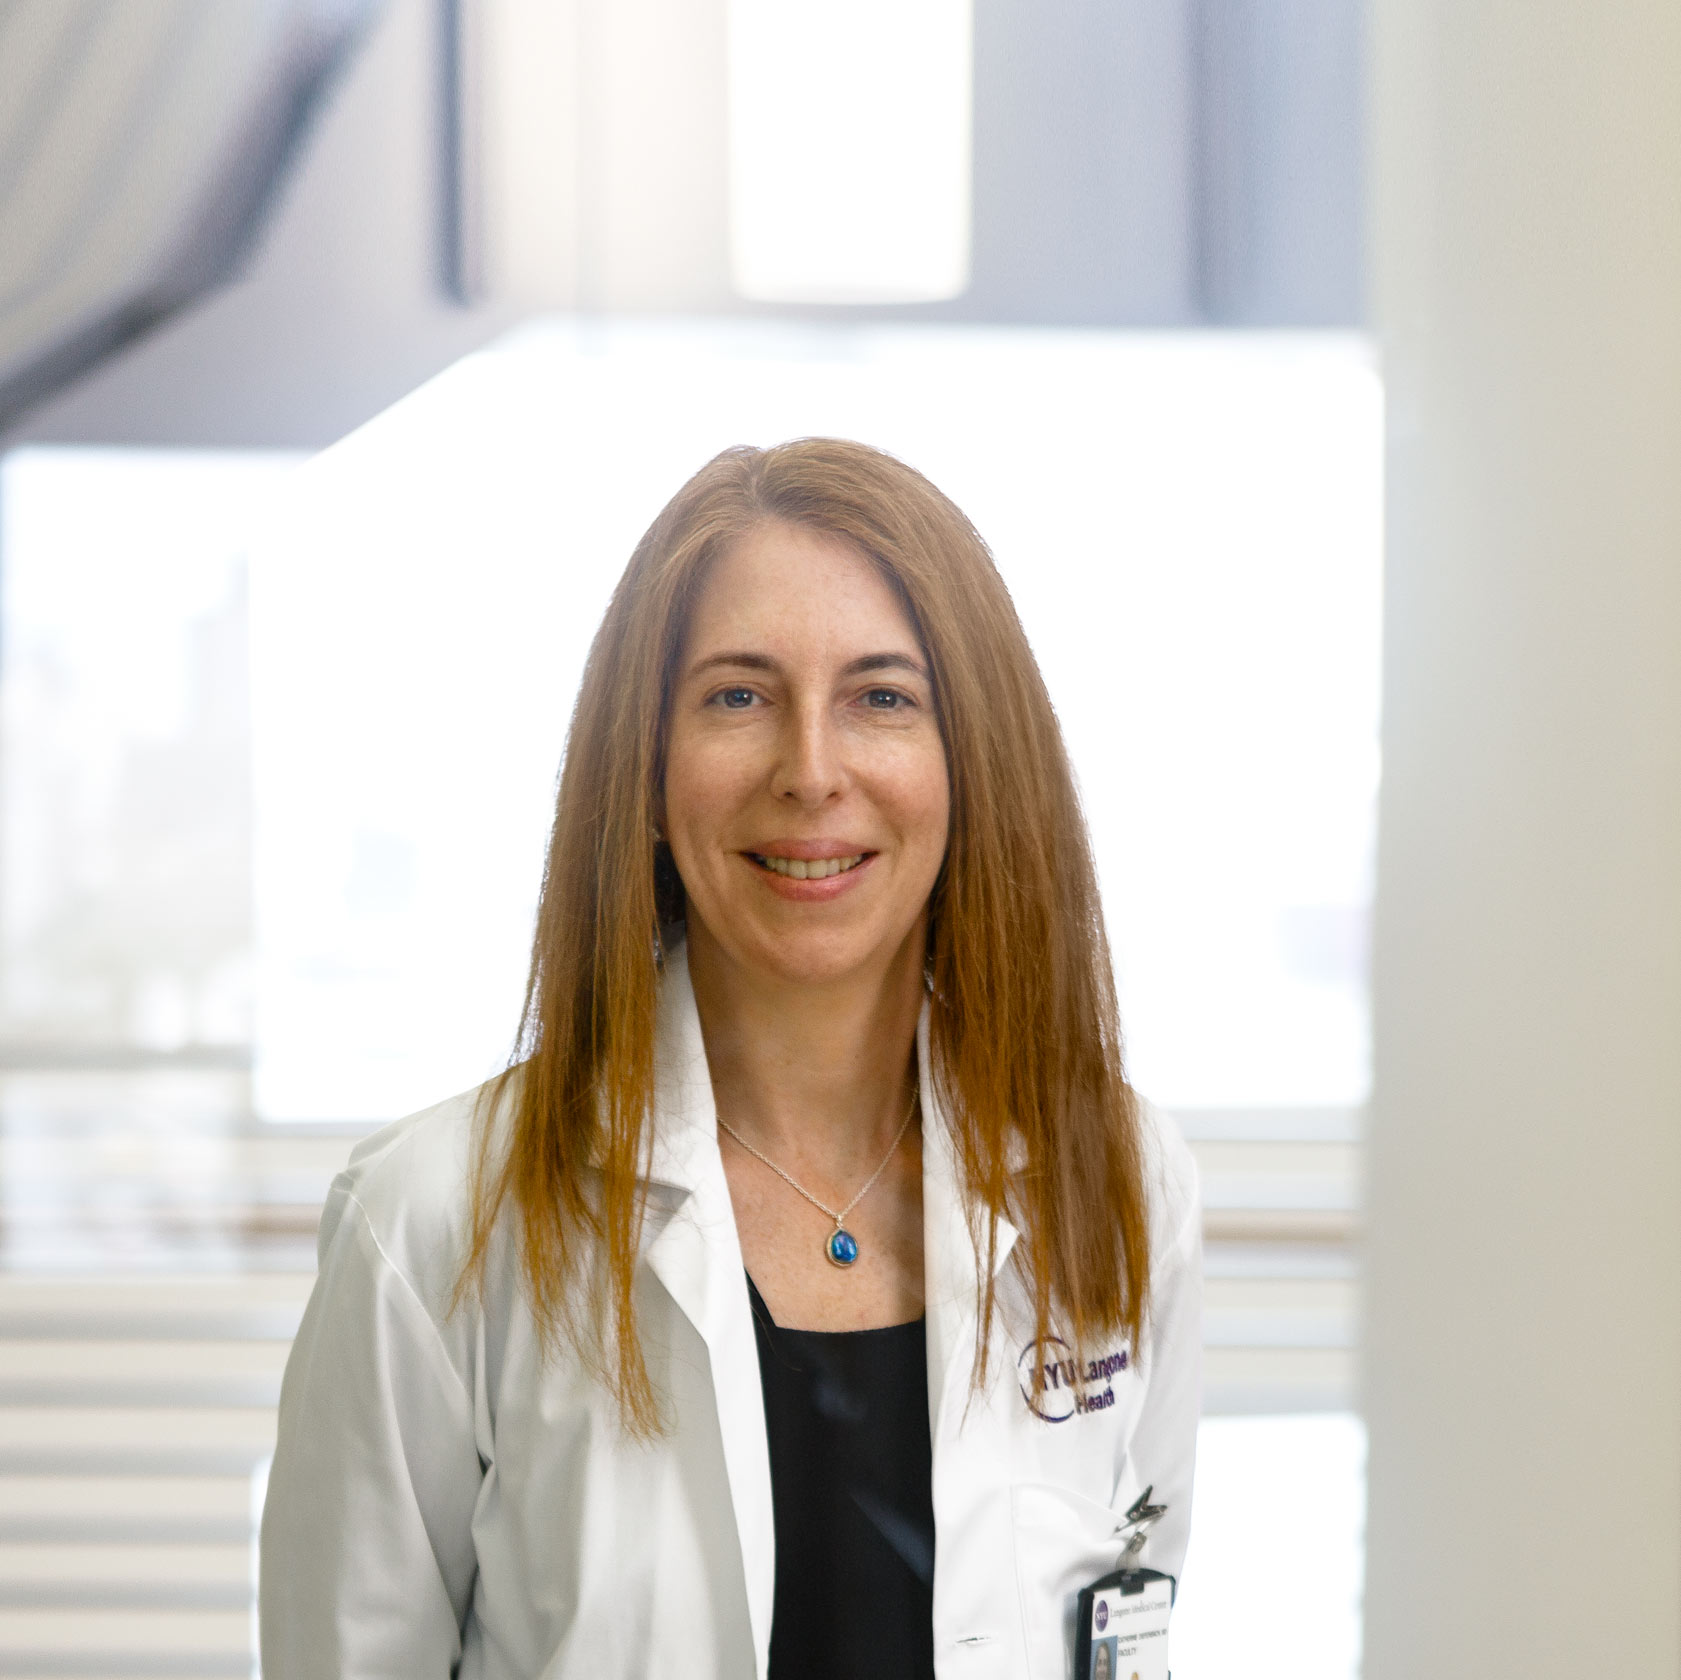 Hematologist Dr. Catherine Diefenbach